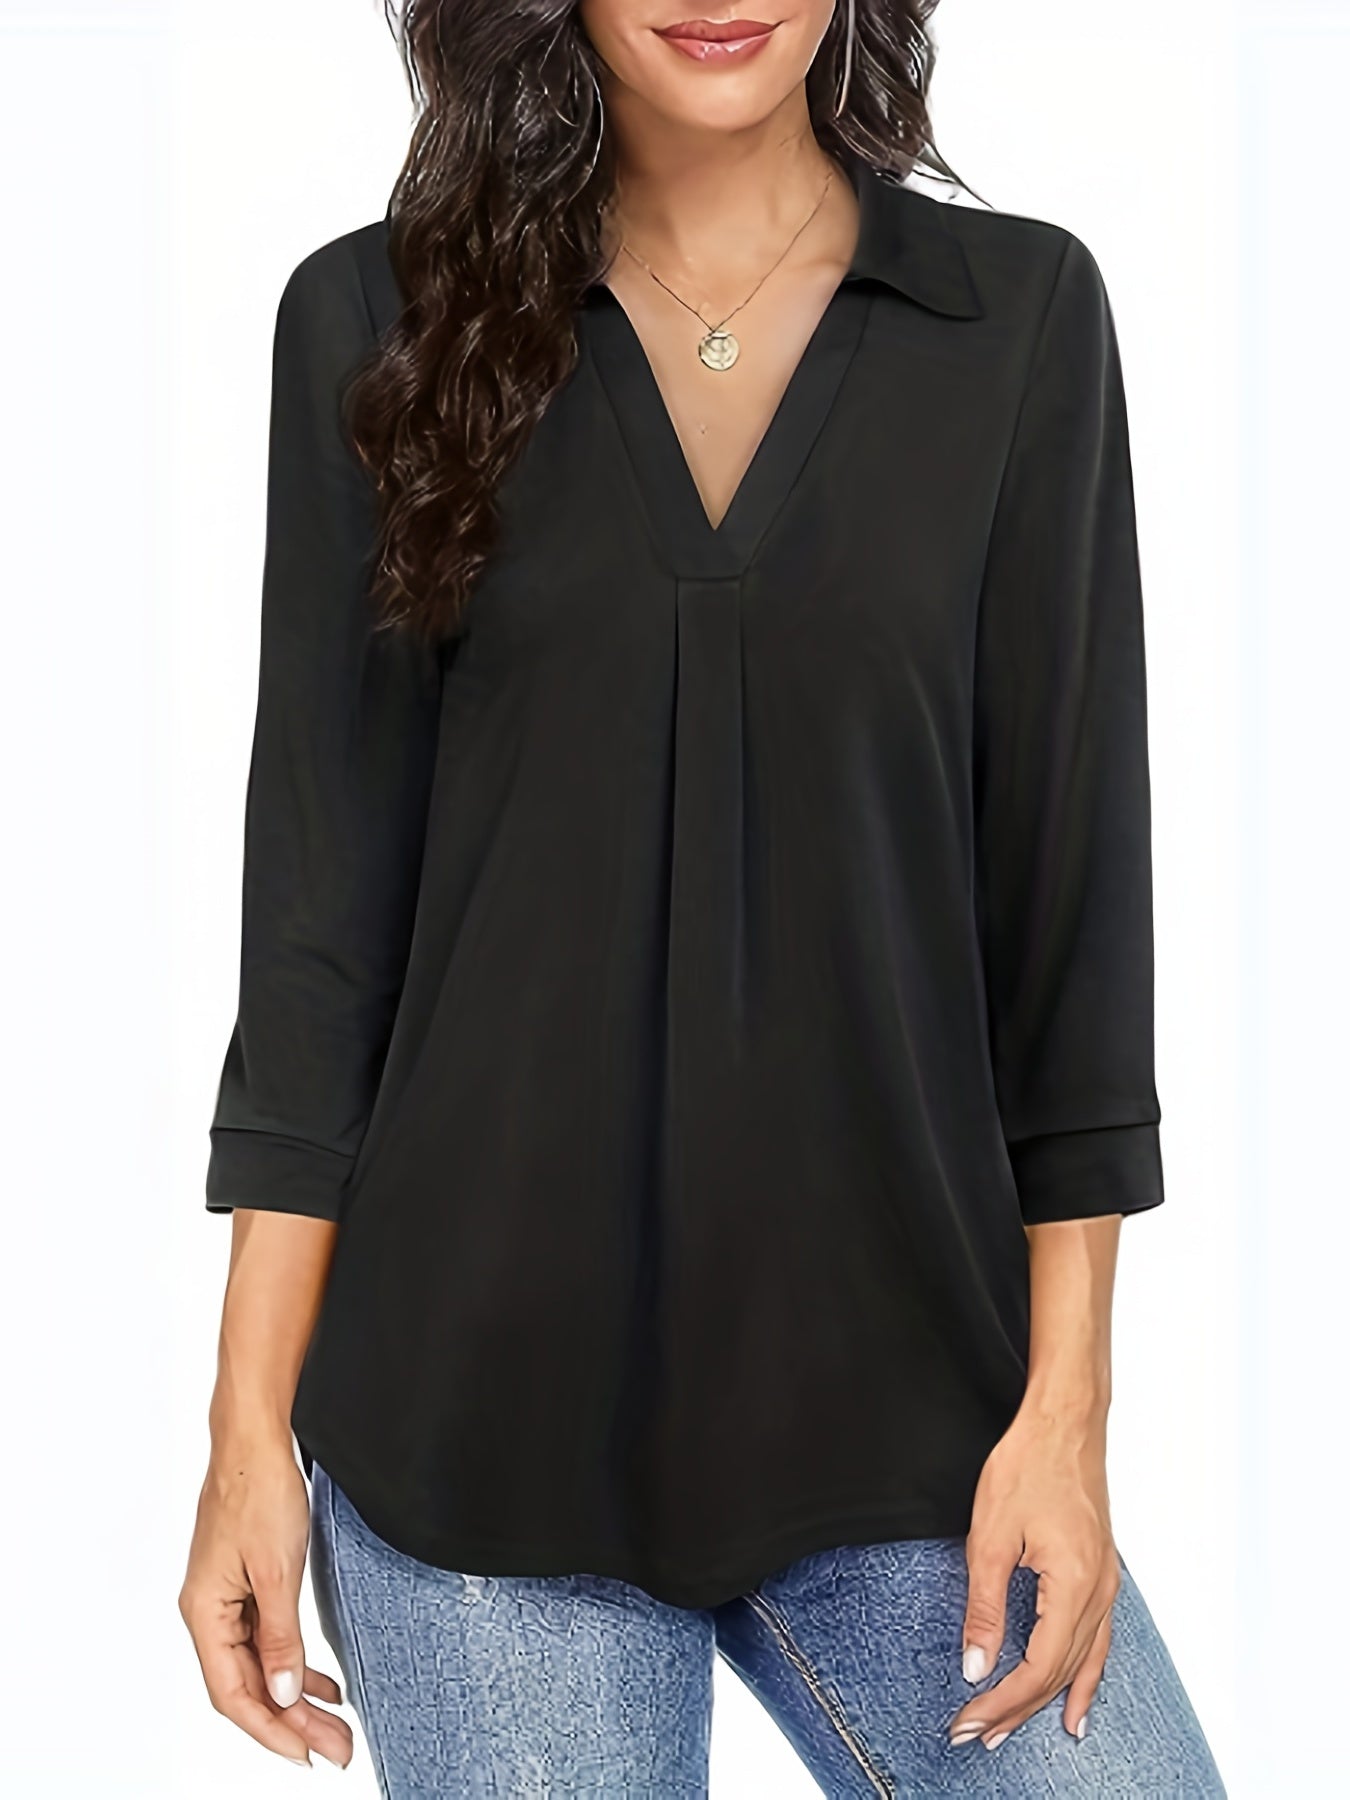 Plus Size Casual Blouse, Women's Plus Solid Half Sleeve Turn Down Collar Tunic Top